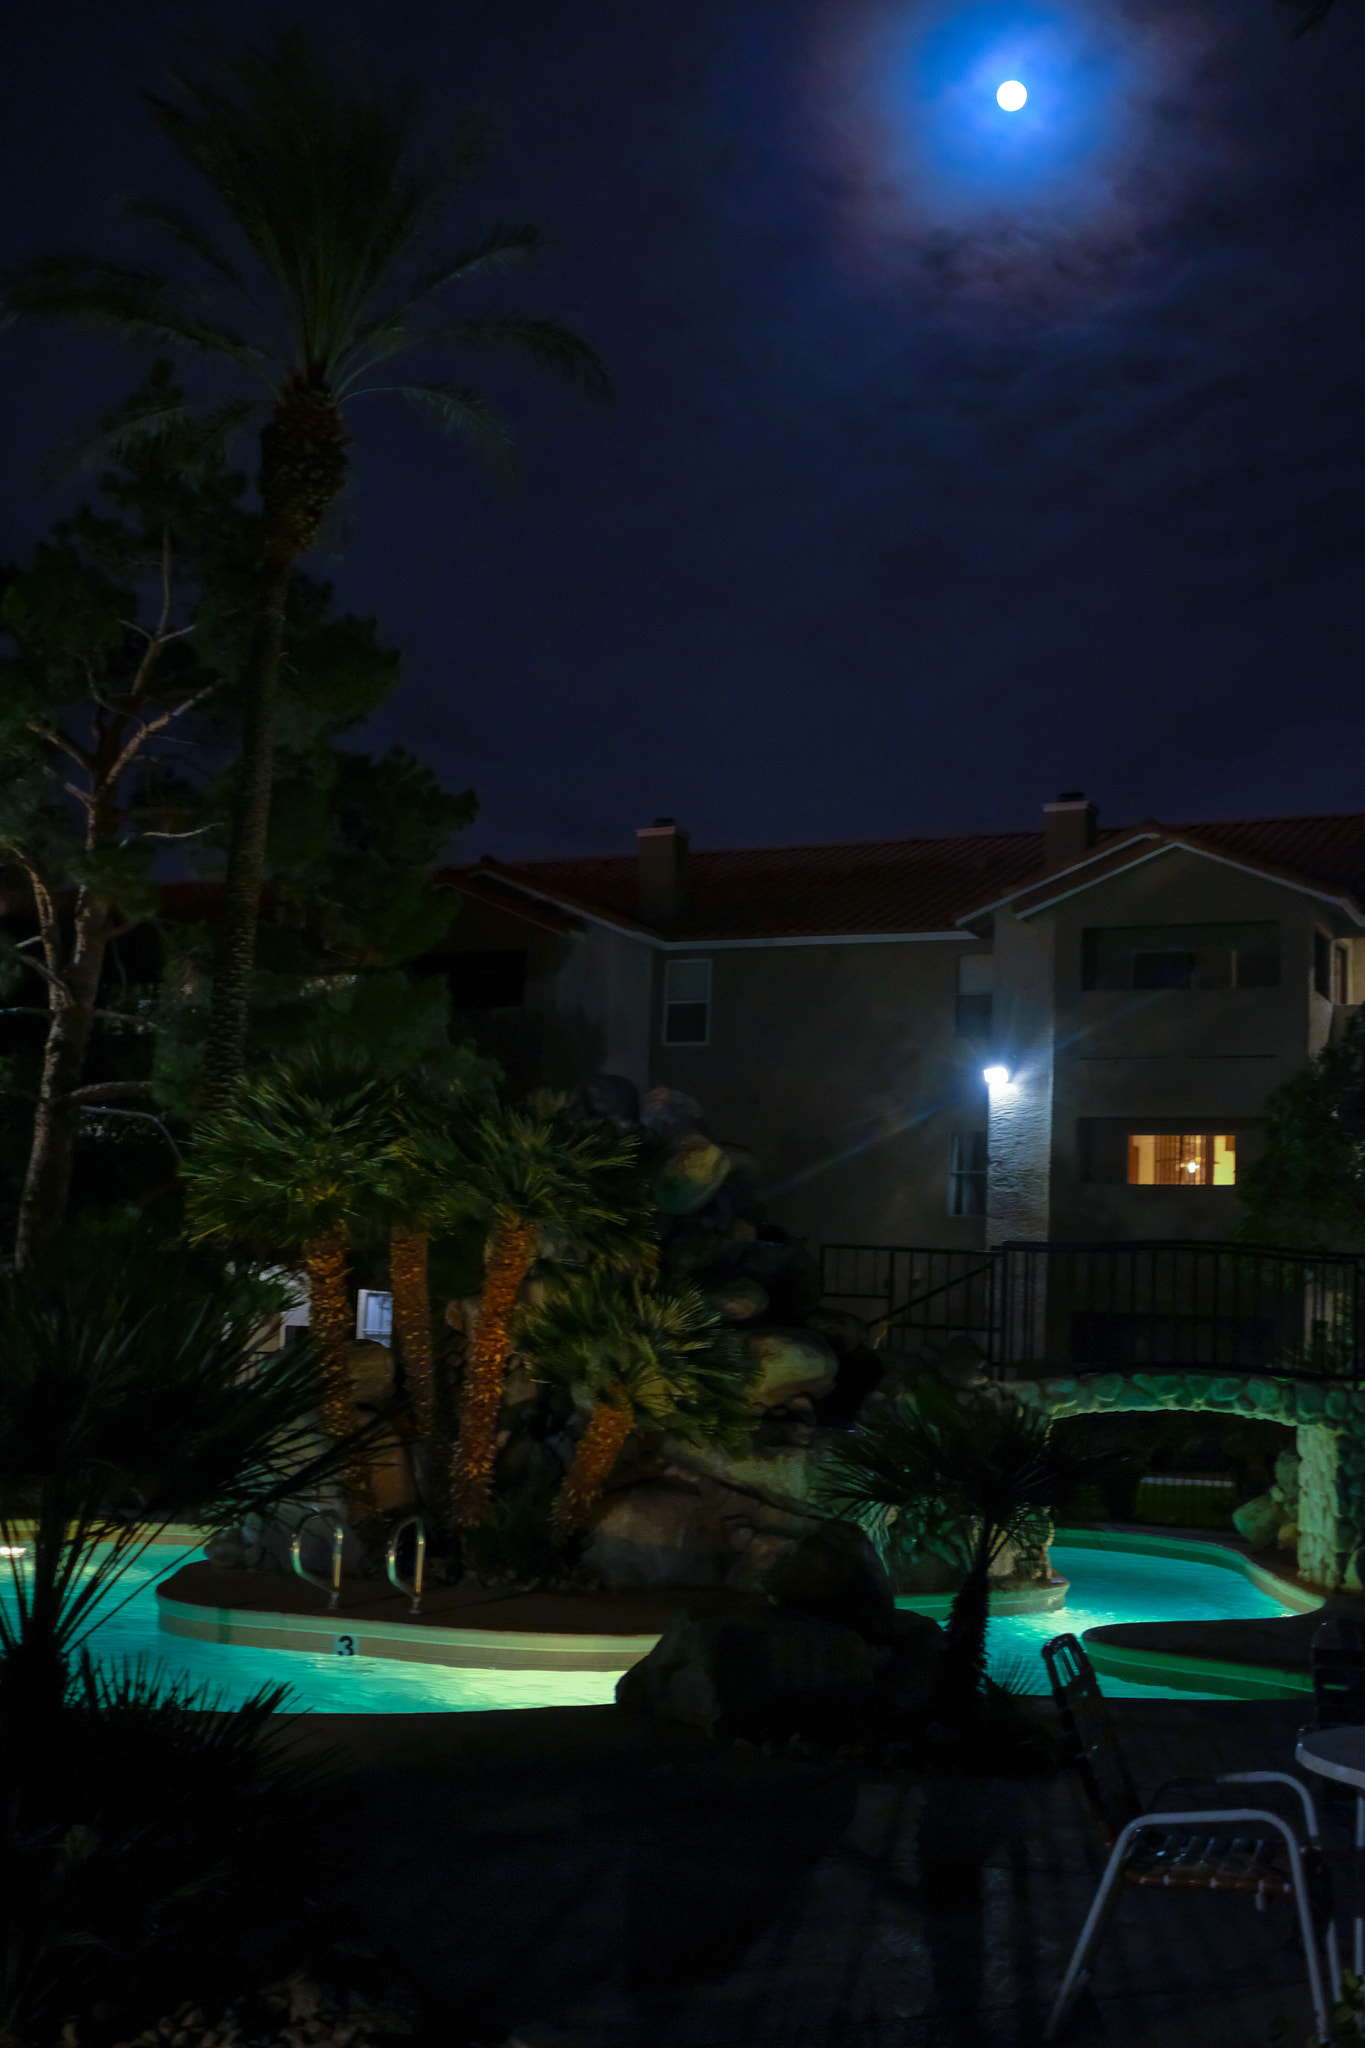 Fujifilm X-T2 sample photo. Bright full moon over pool (of ) photography